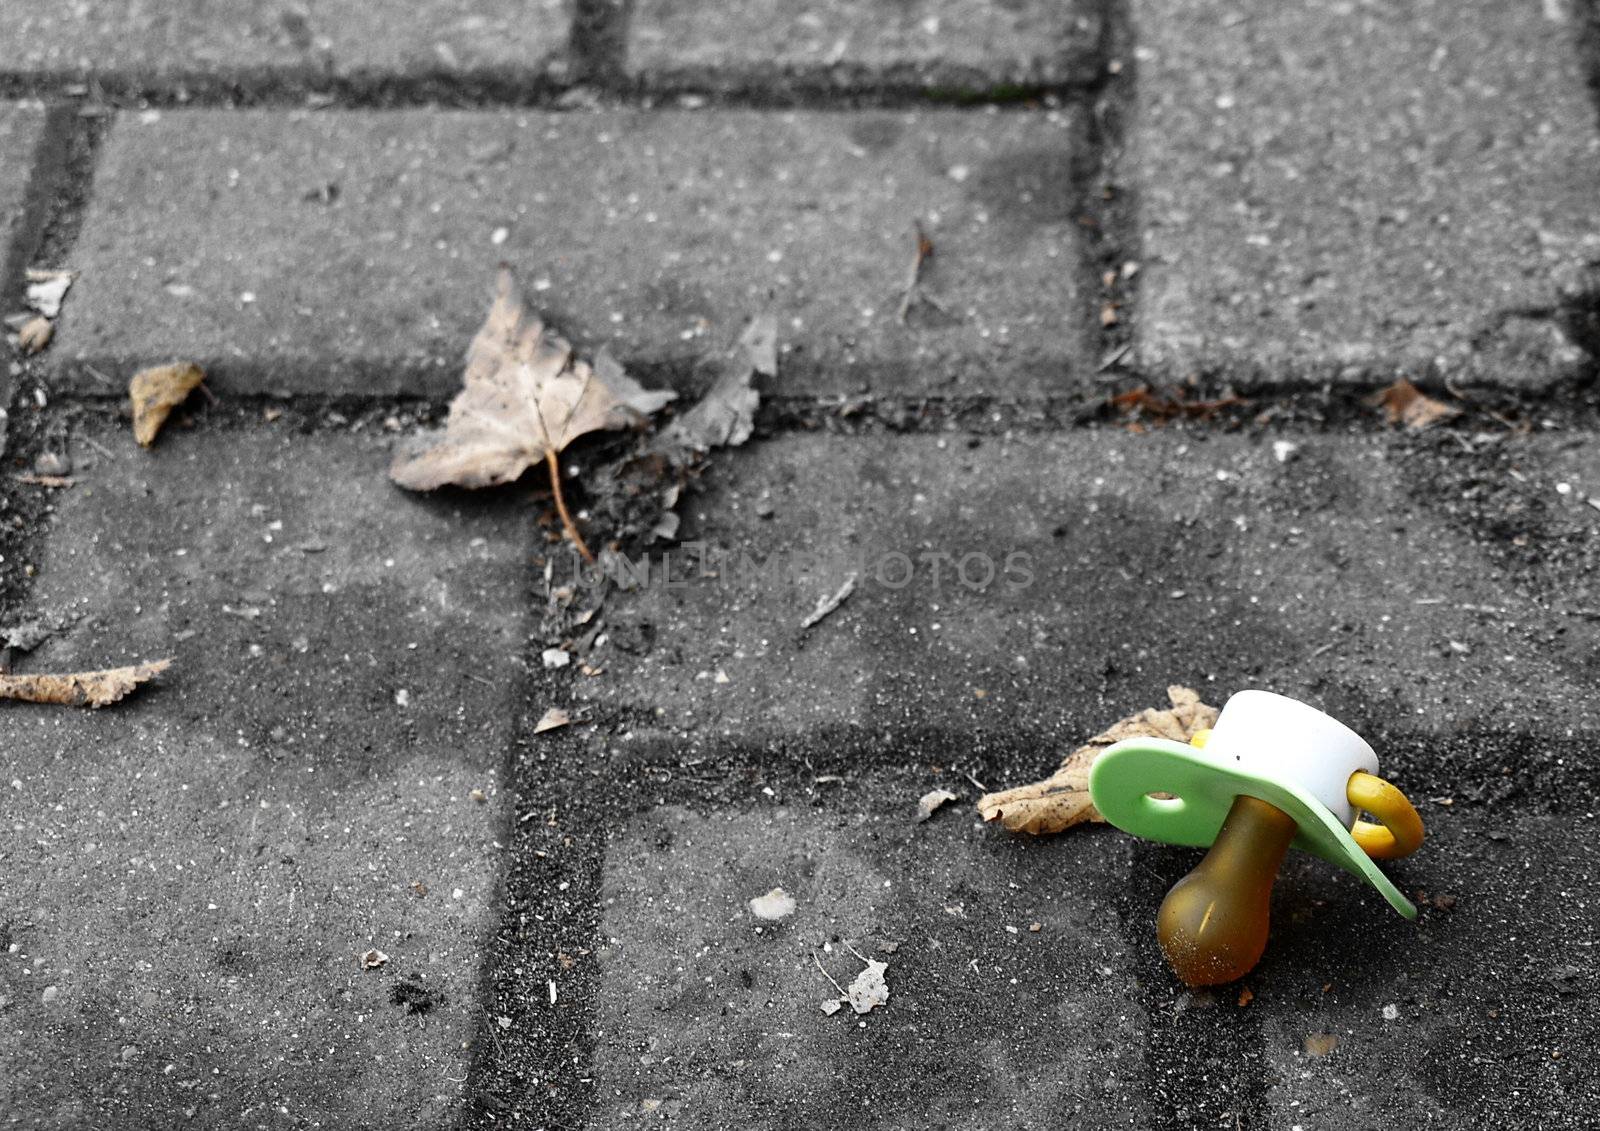 Lost soother on the ground by anderm